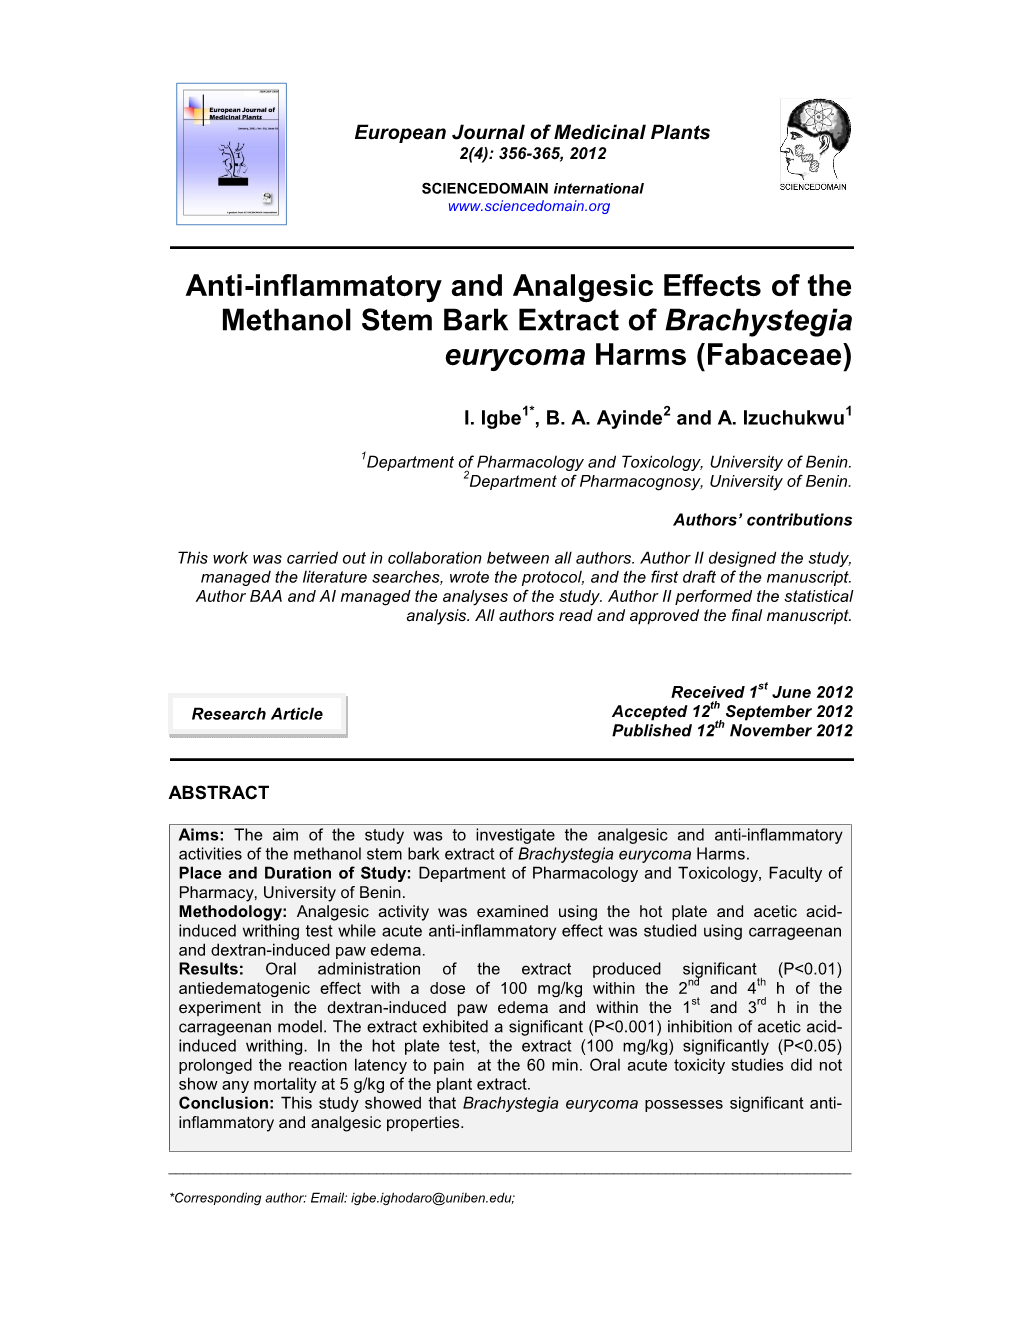 Anti-Inflammatory and Analgesic Effects of the Methanol Stem Bark Extract of Brachystegia Eurycoma Harms (Fabaceae)